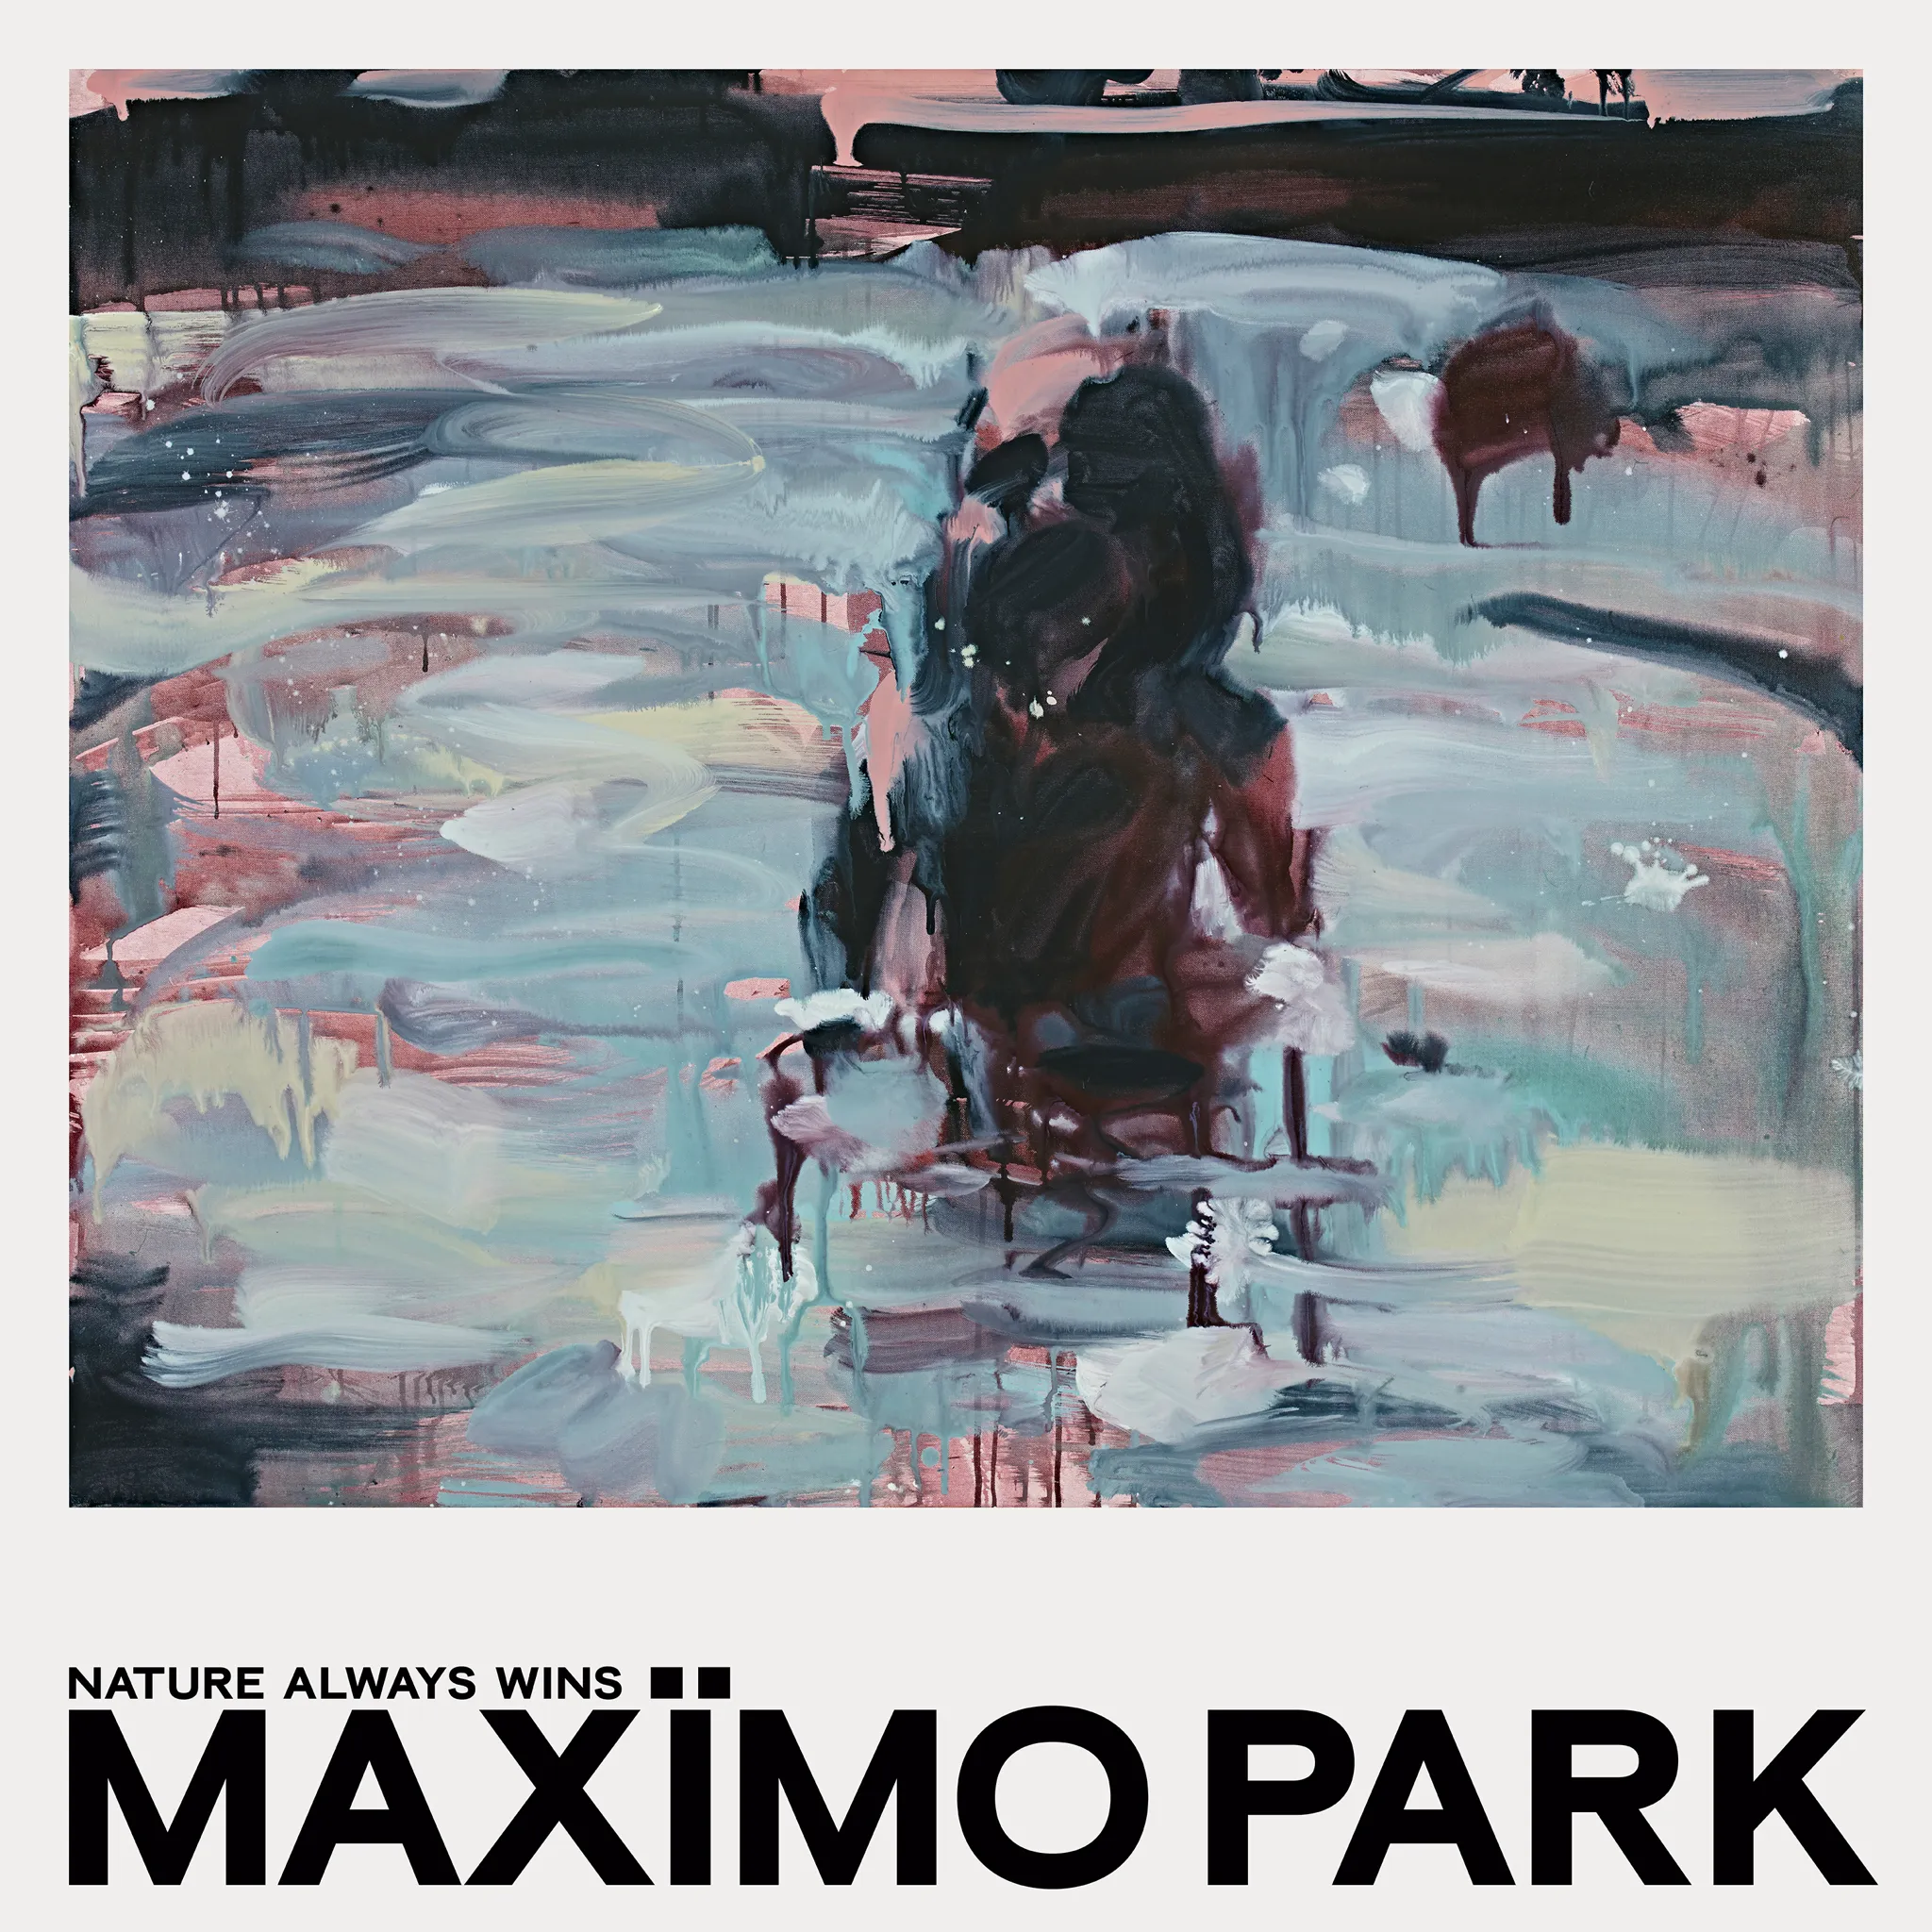 <strong>Maximo Park - Nature Always Wins</strong> (Vinyl LP - black)